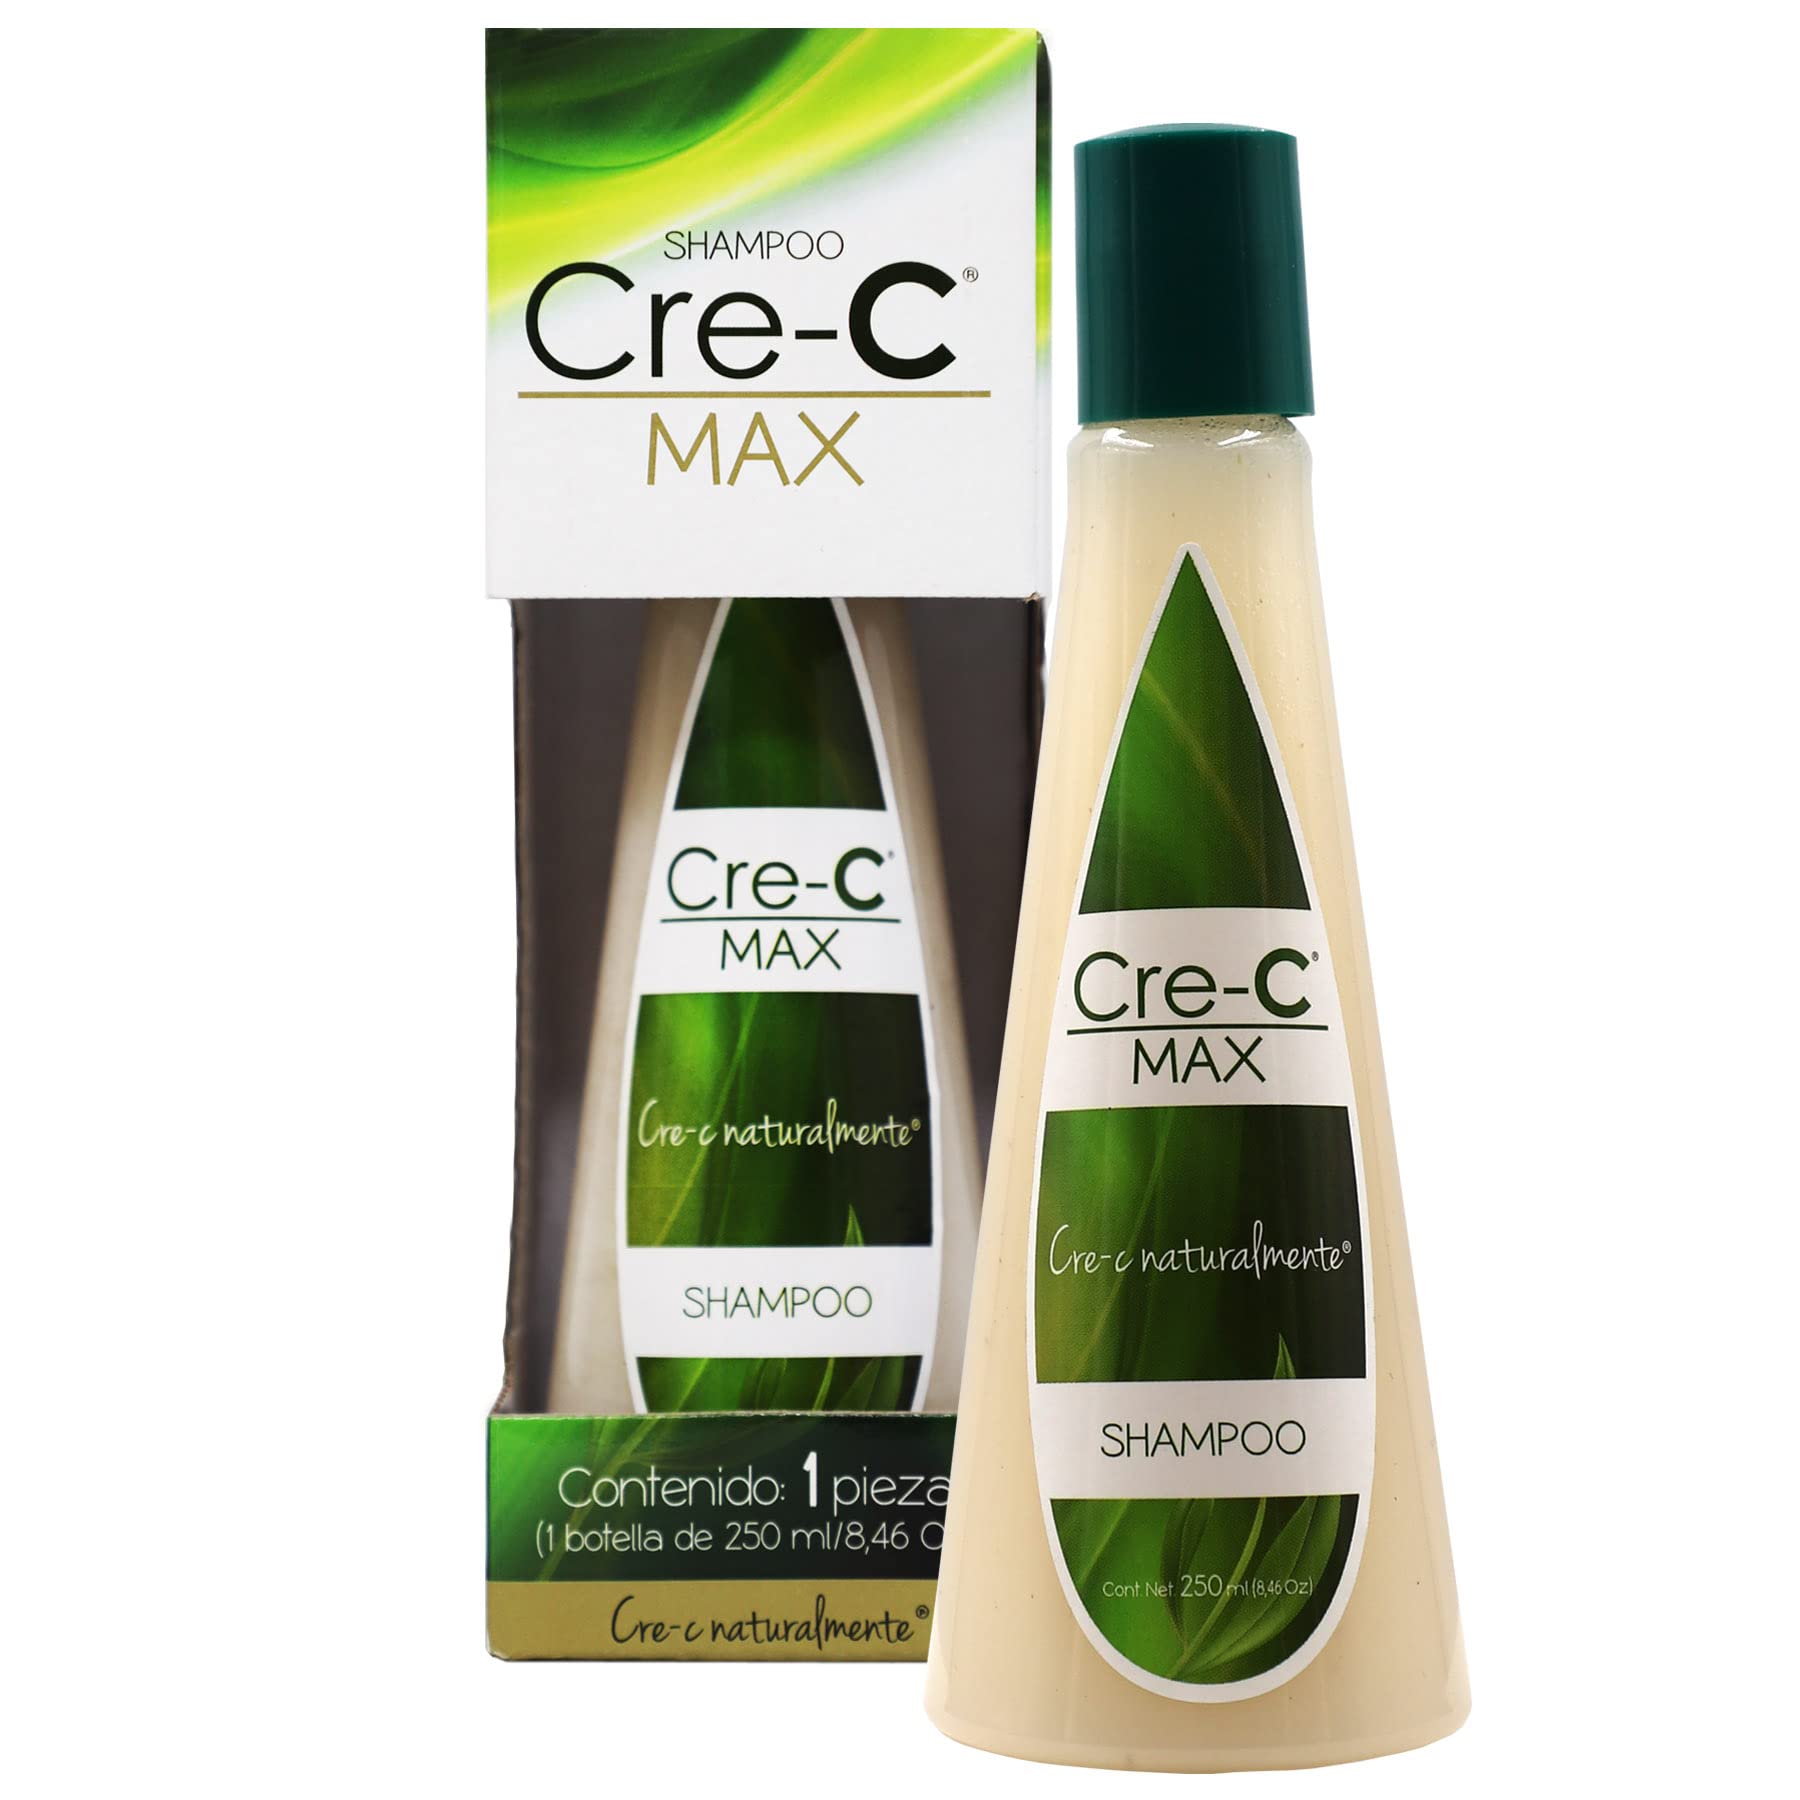 Cre-C Max Shampoo, Cleansing Shampoo, Strengthening Shampoo, Helps Prevent Hair Loss for men and women, Volume and Shine to your hair, 8.46 FL Oz, Bottle